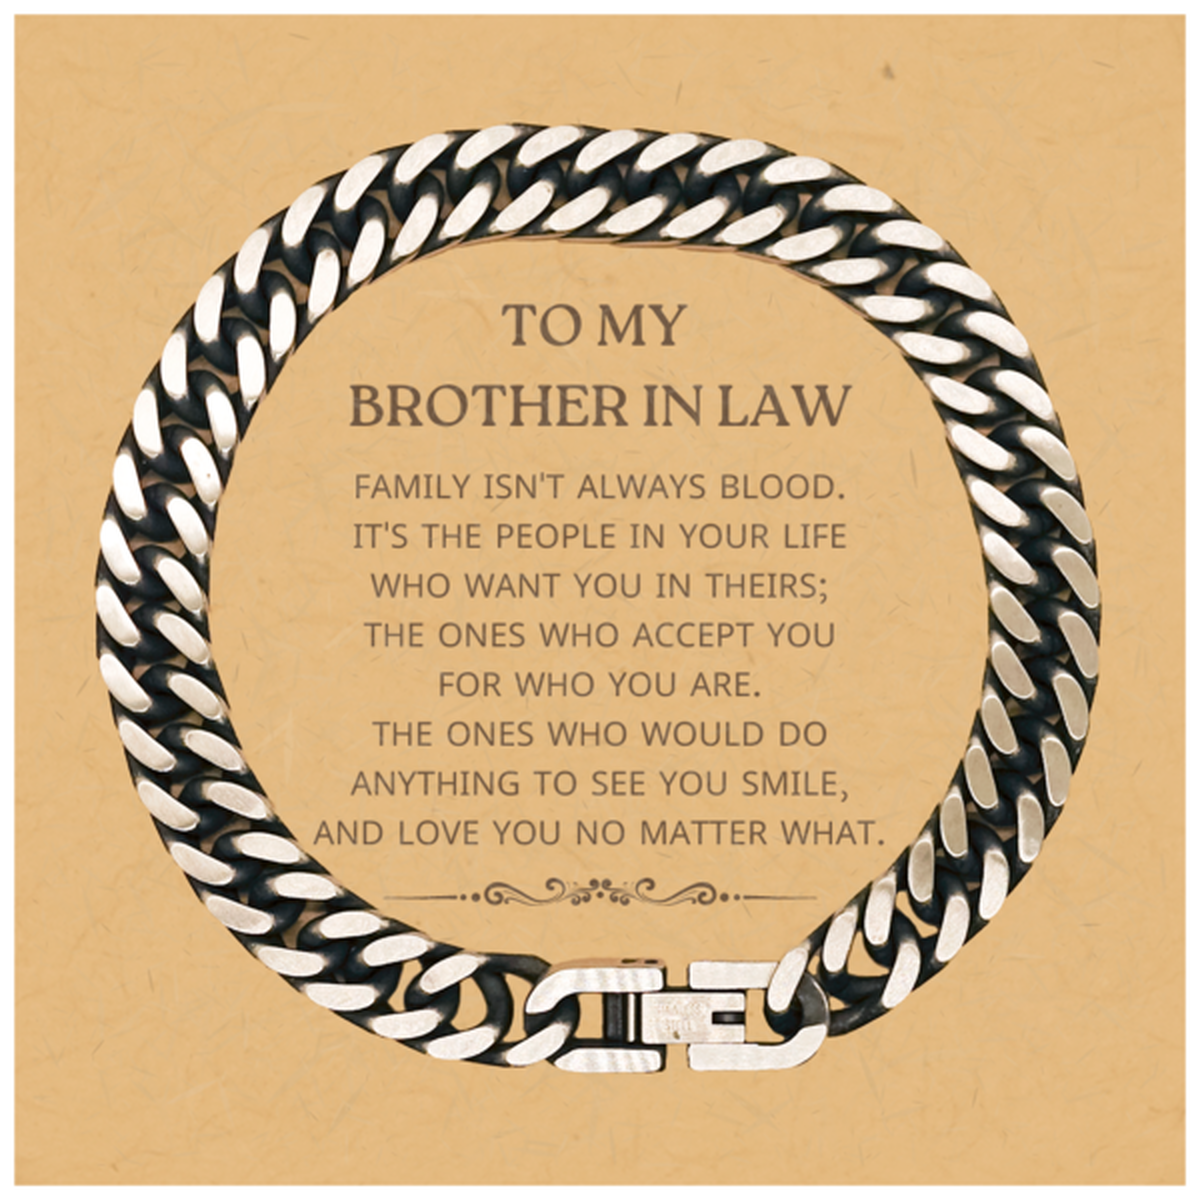 To My Brother In Law Gifts, Family isn't always blood, Brother In Law Cuban Link Chain Bracelet, Birthday Christmas Unique Present For Brother In Law